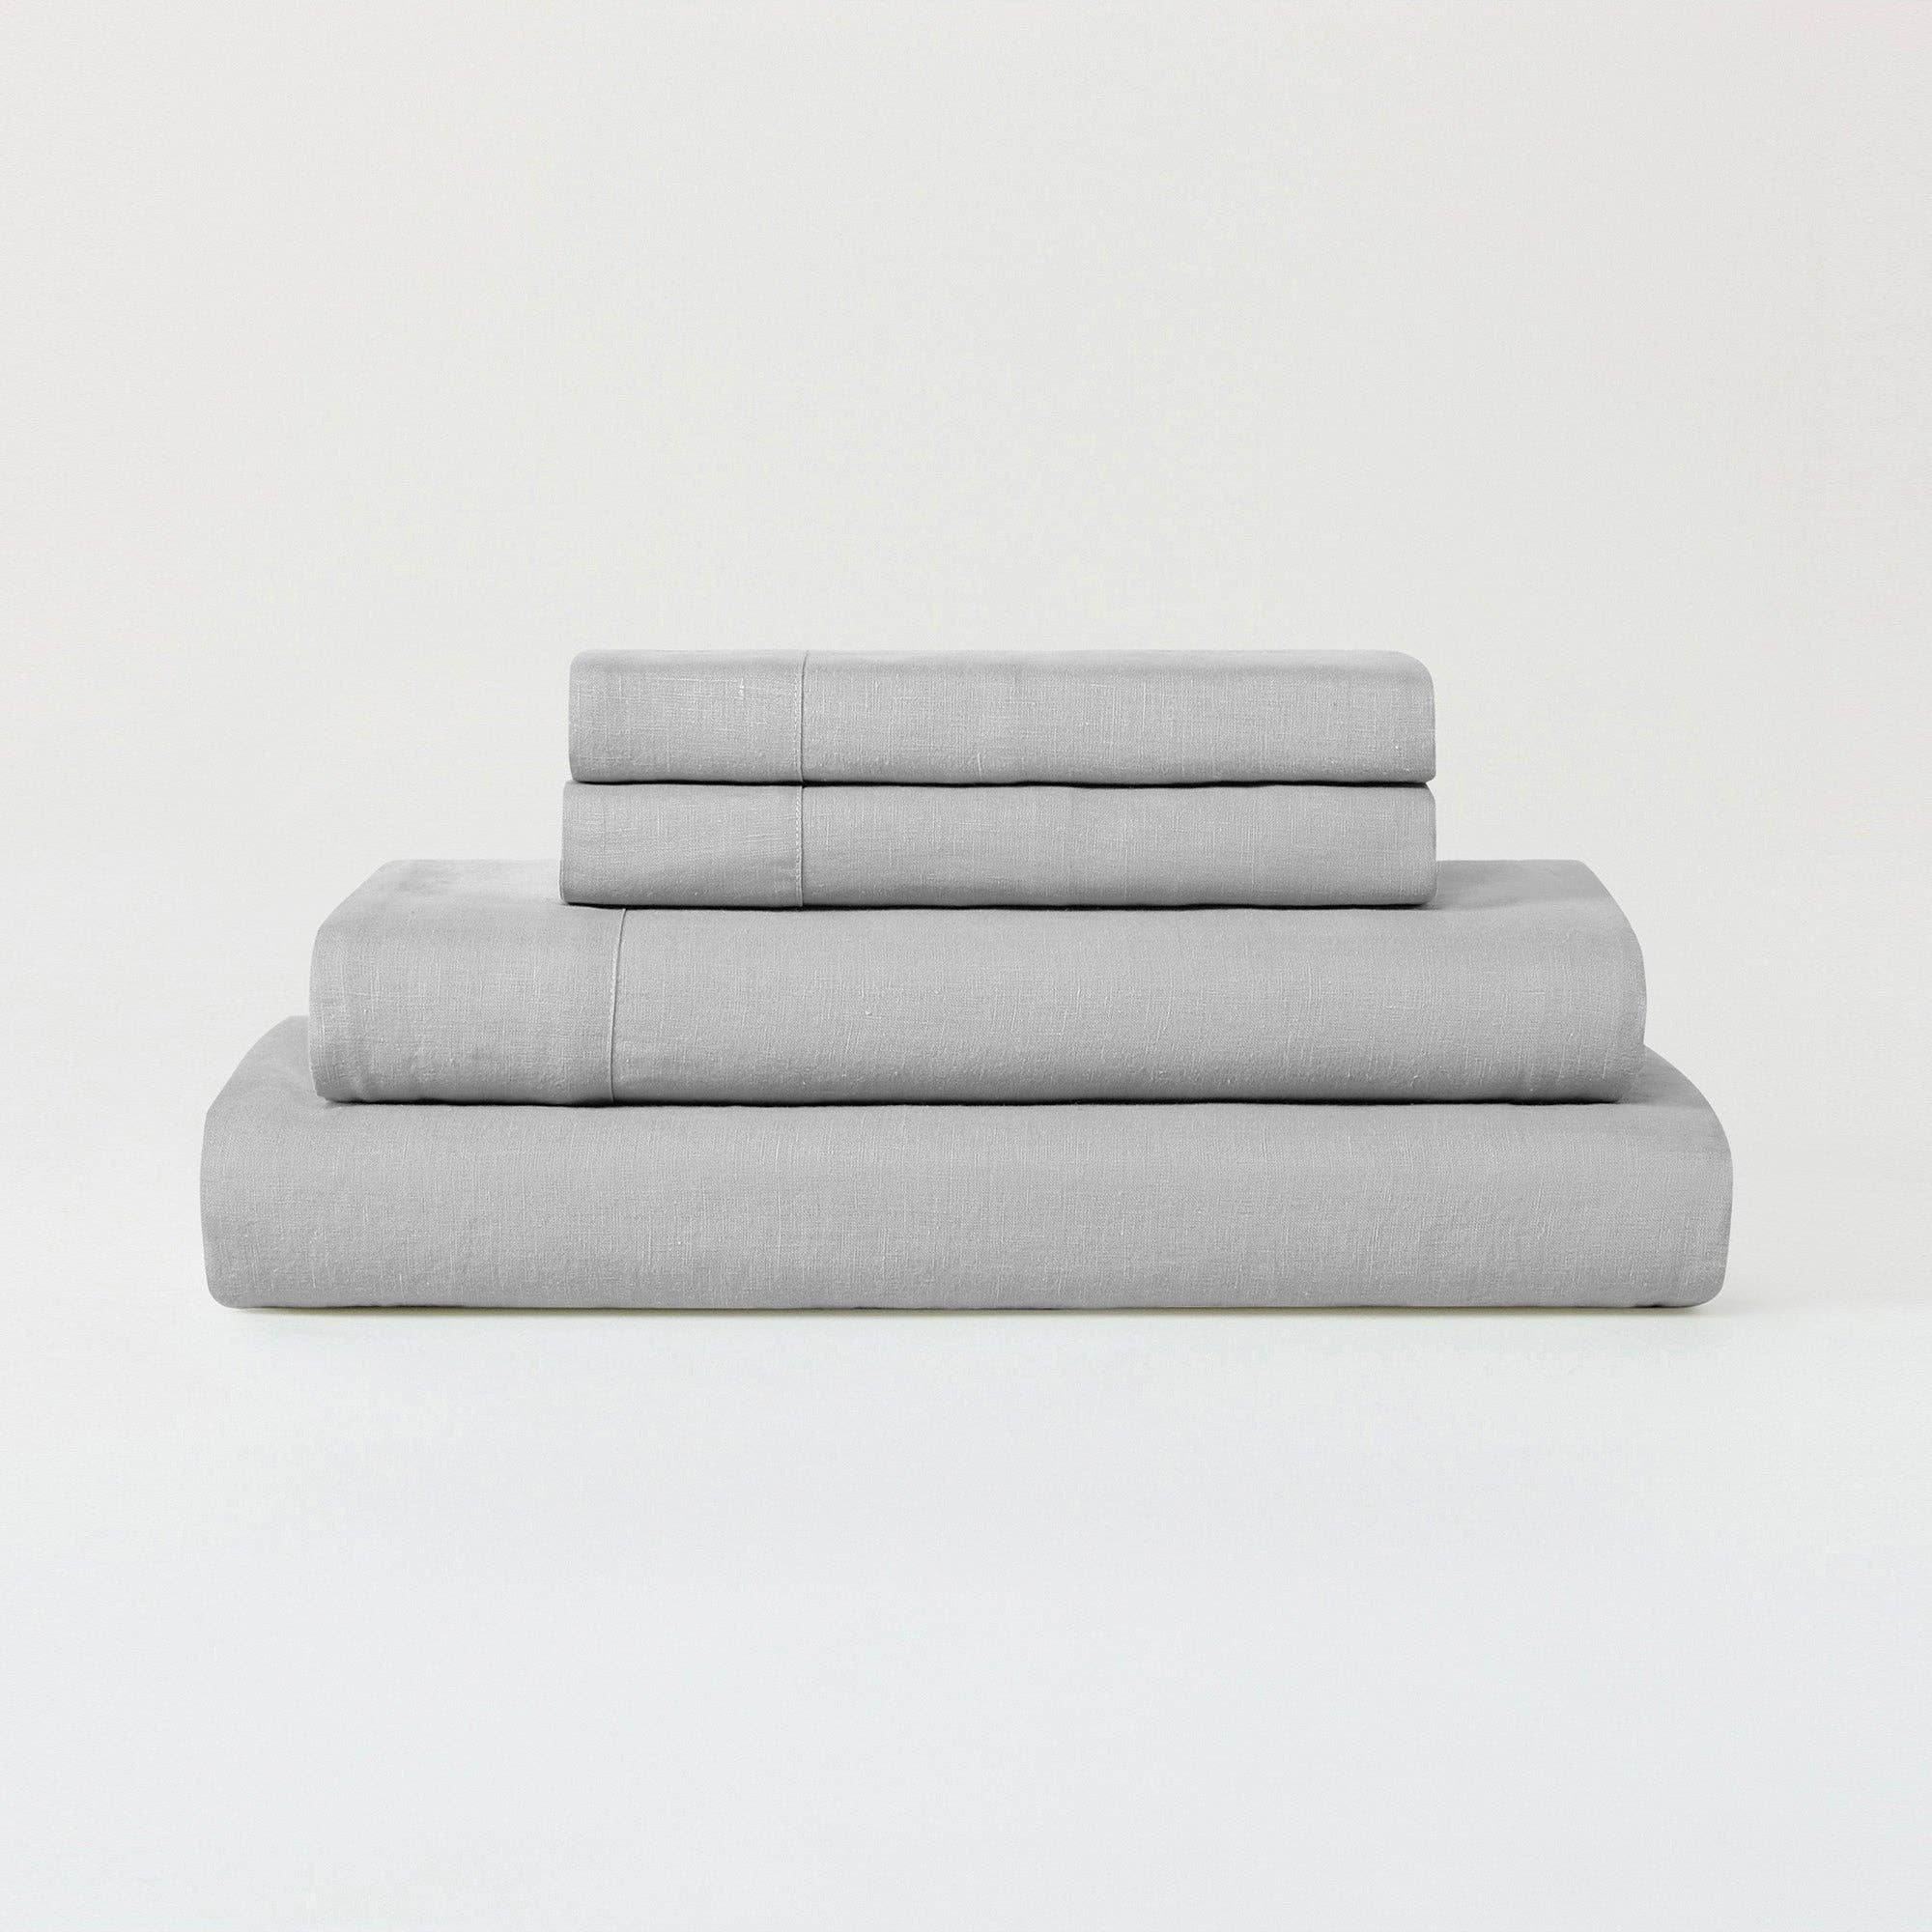 French Linen Luxeweave Sheet Set - Dove